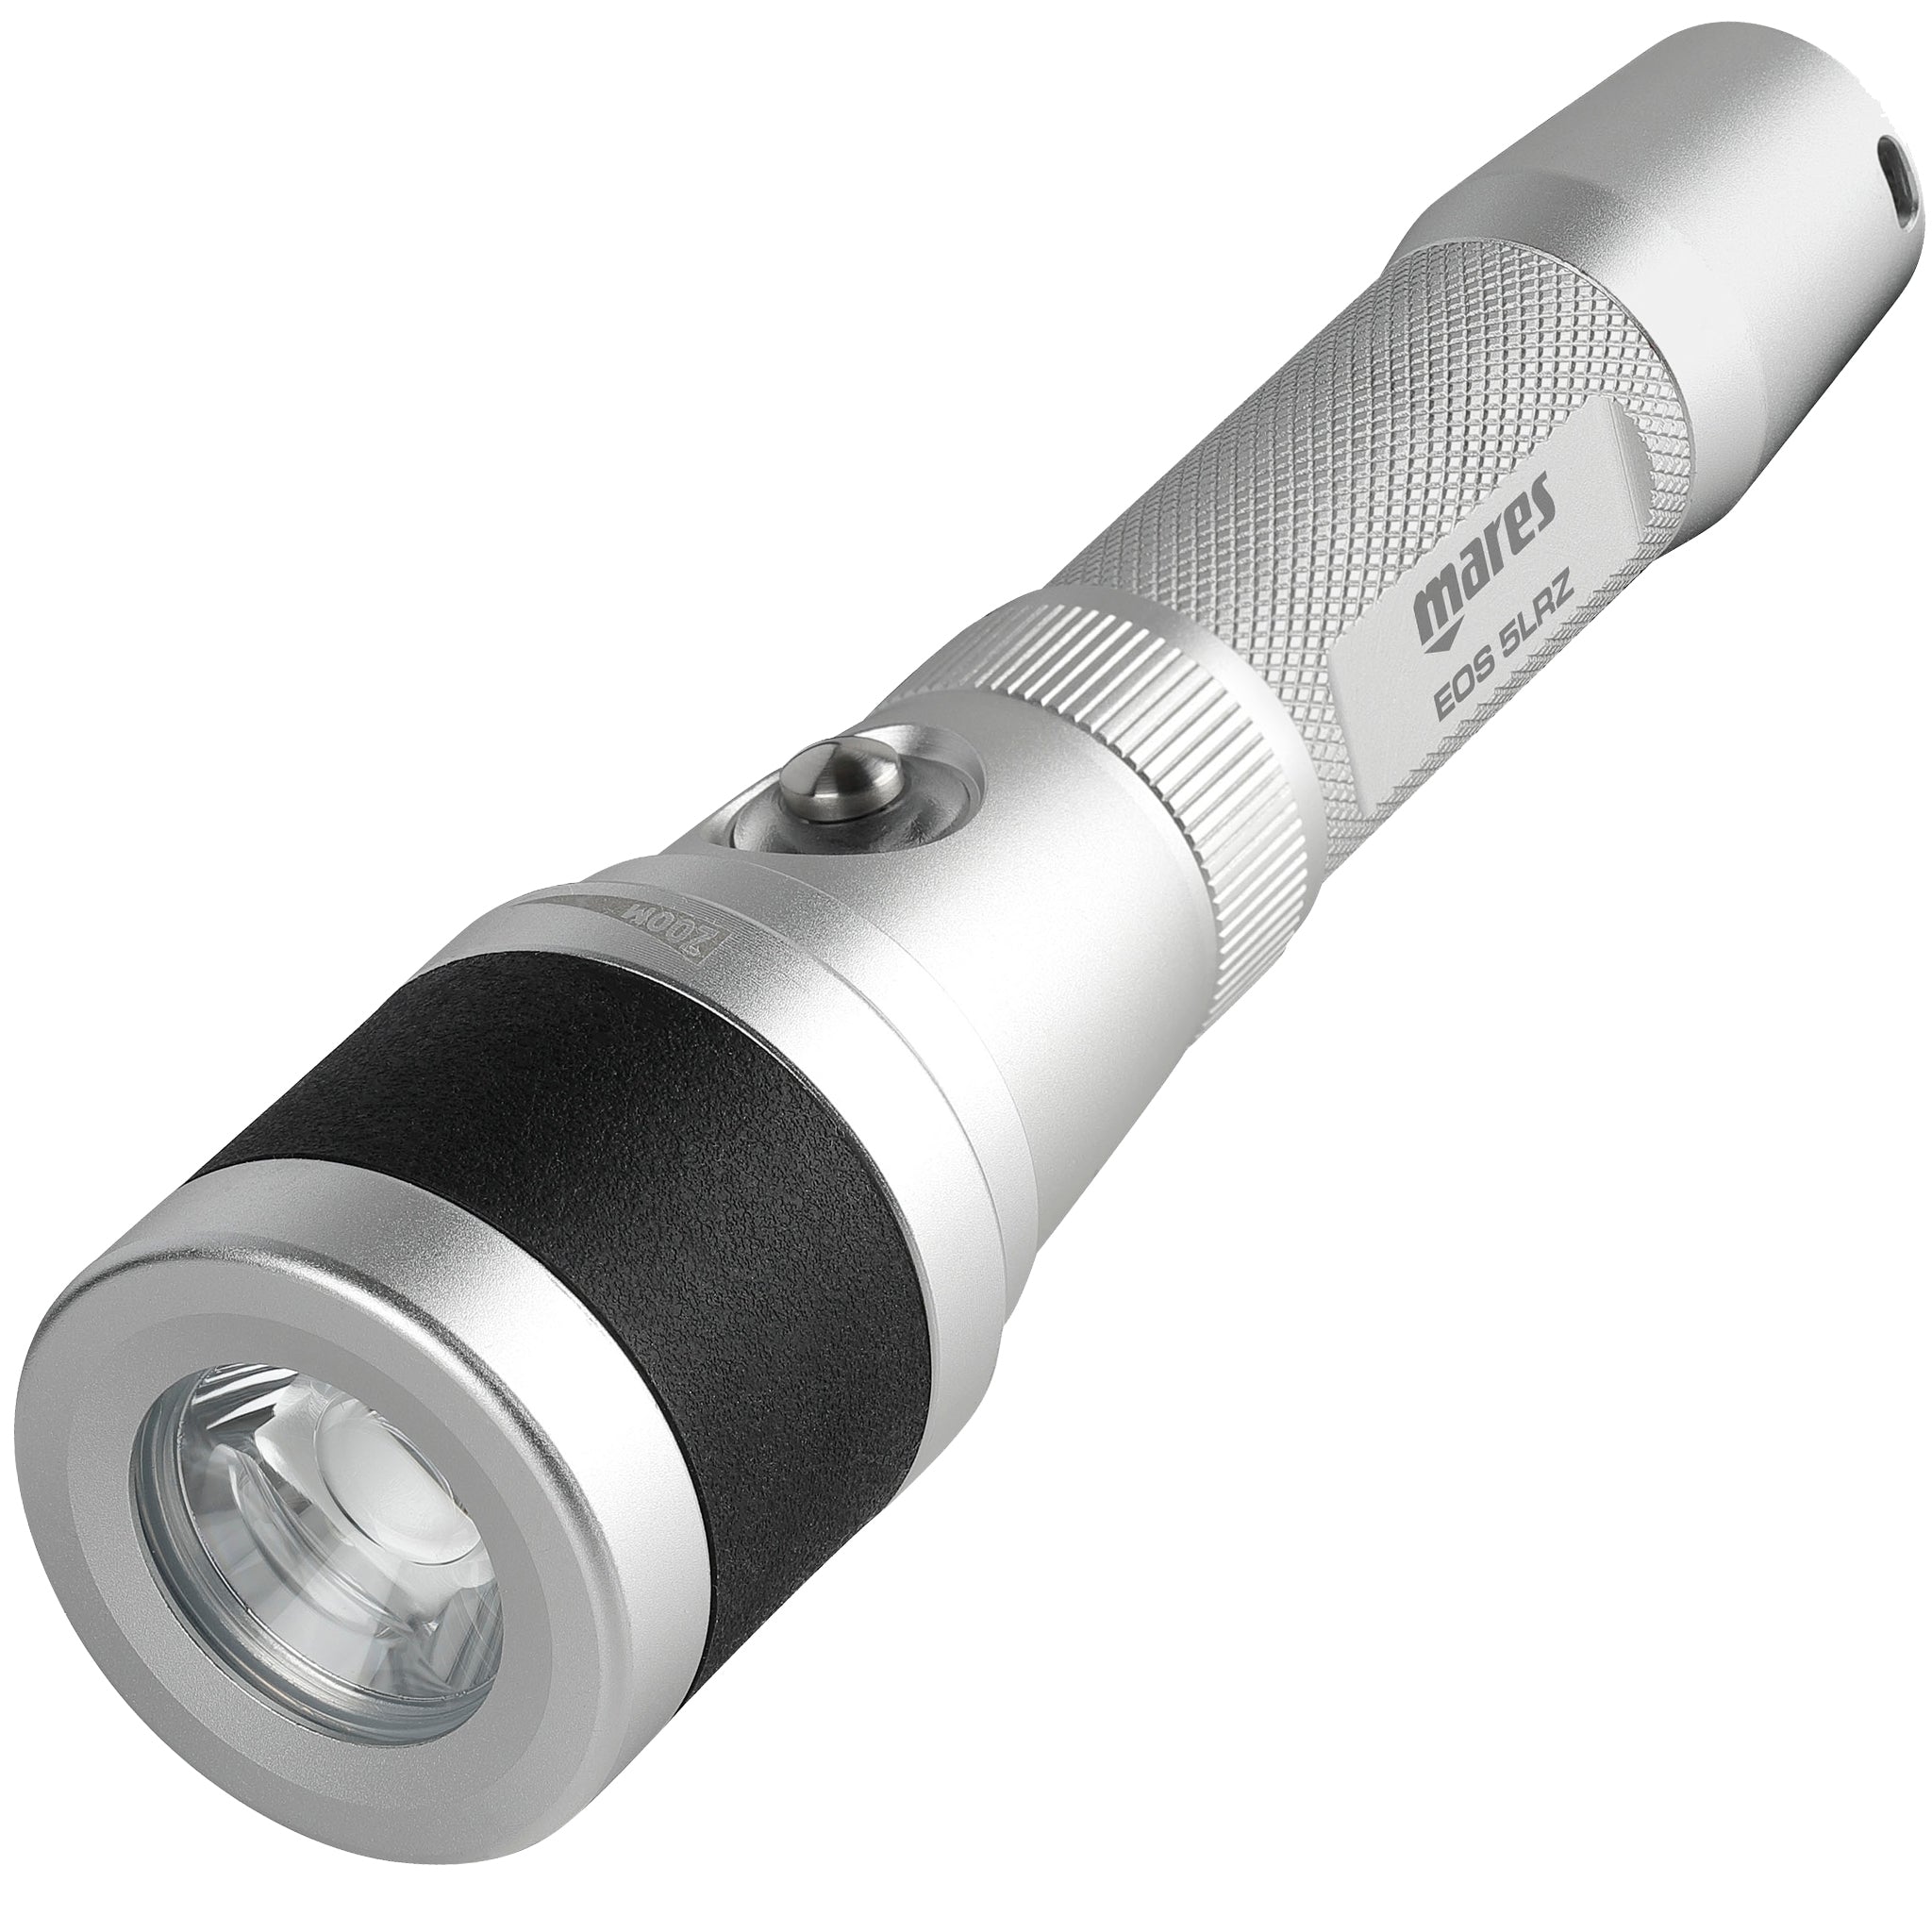 Mares EOS 5LRZ Dive Torch - Rechargeable Zoom Adjustable Beam